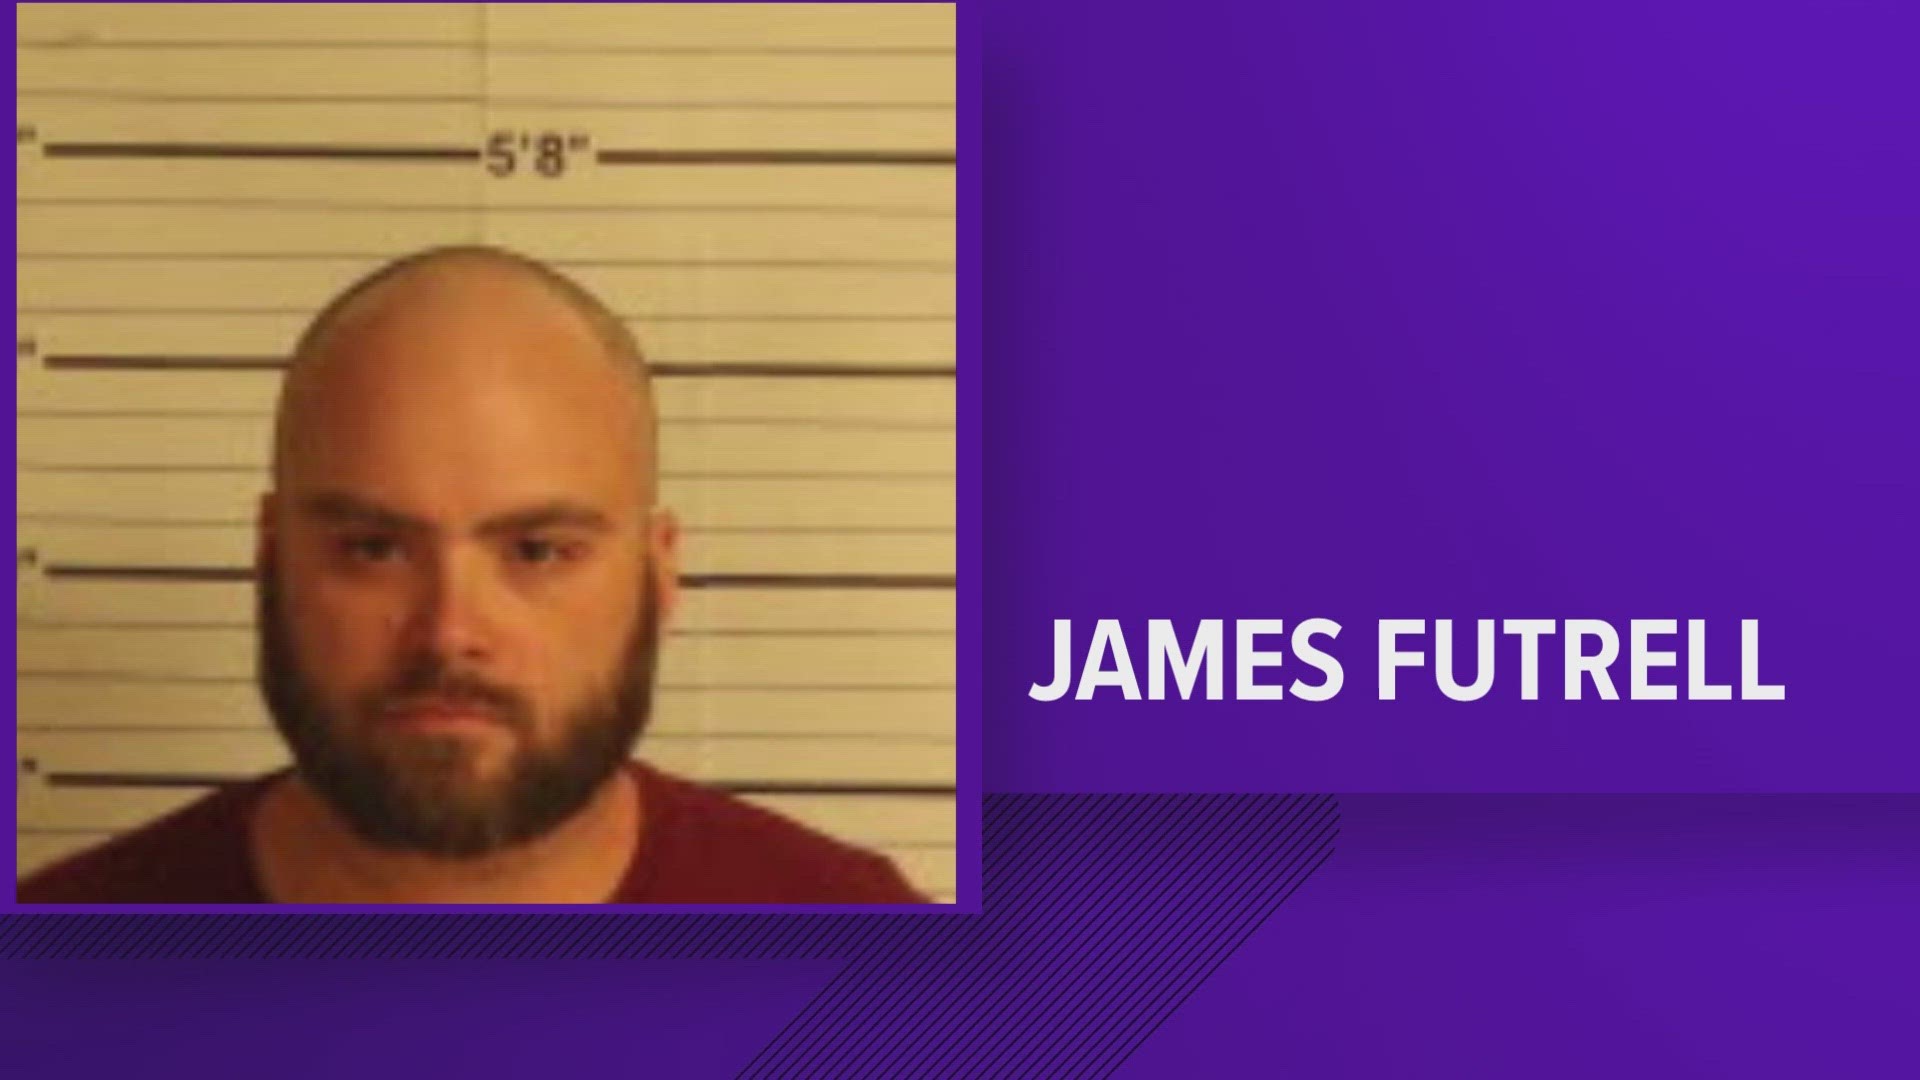 According to the affidavit, James Futrell Jr. confessed to being the driver in the crash at Poplar Ave. and Cooper St. on Wednesday, July 5, 2023.